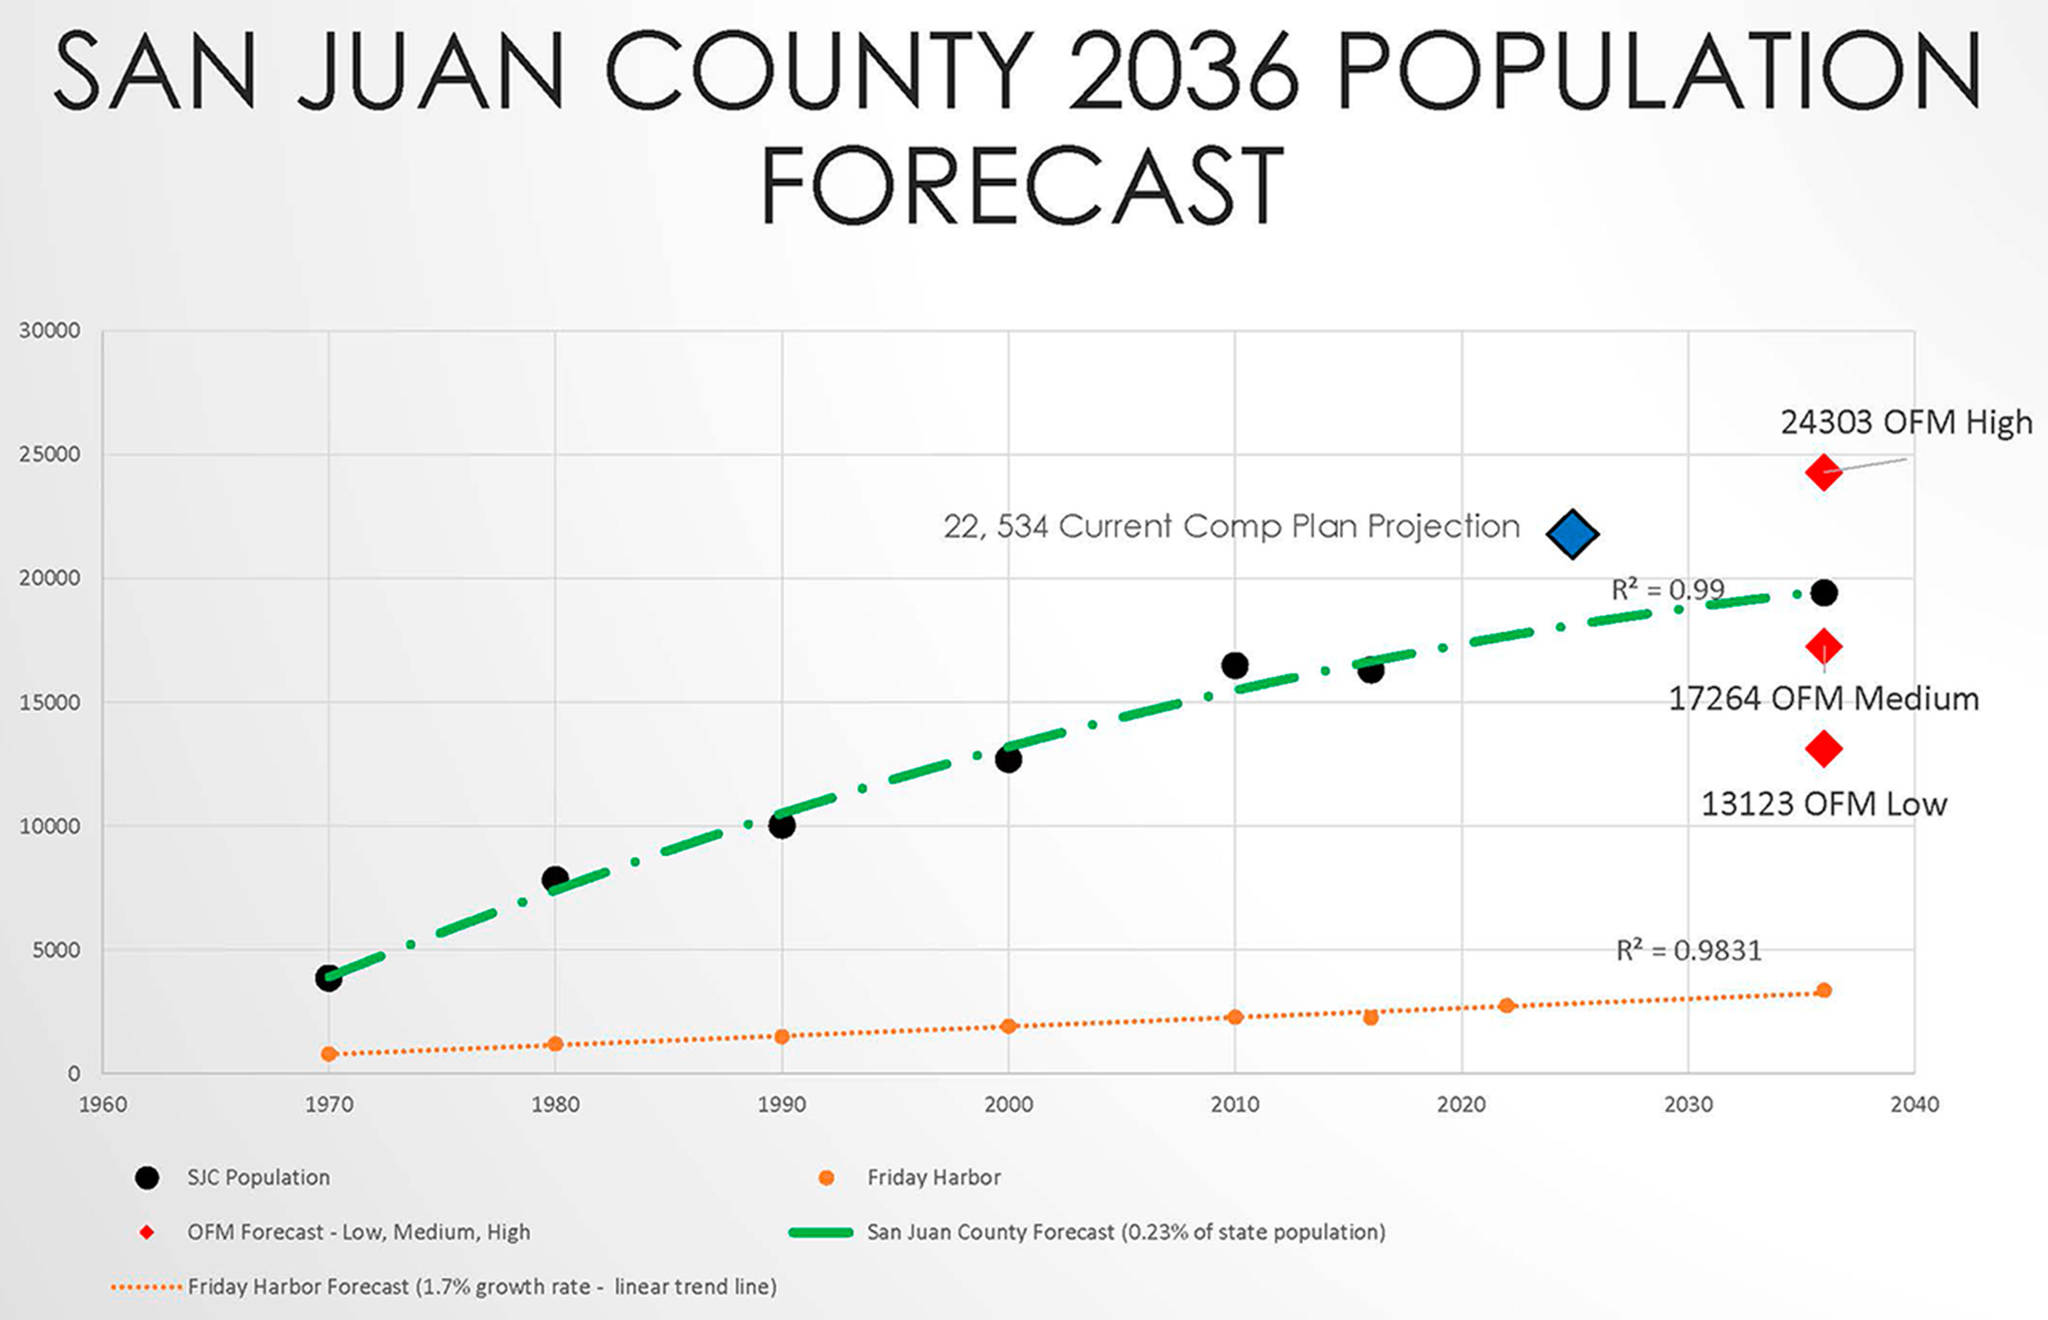 Lower population predicted for San Juan County